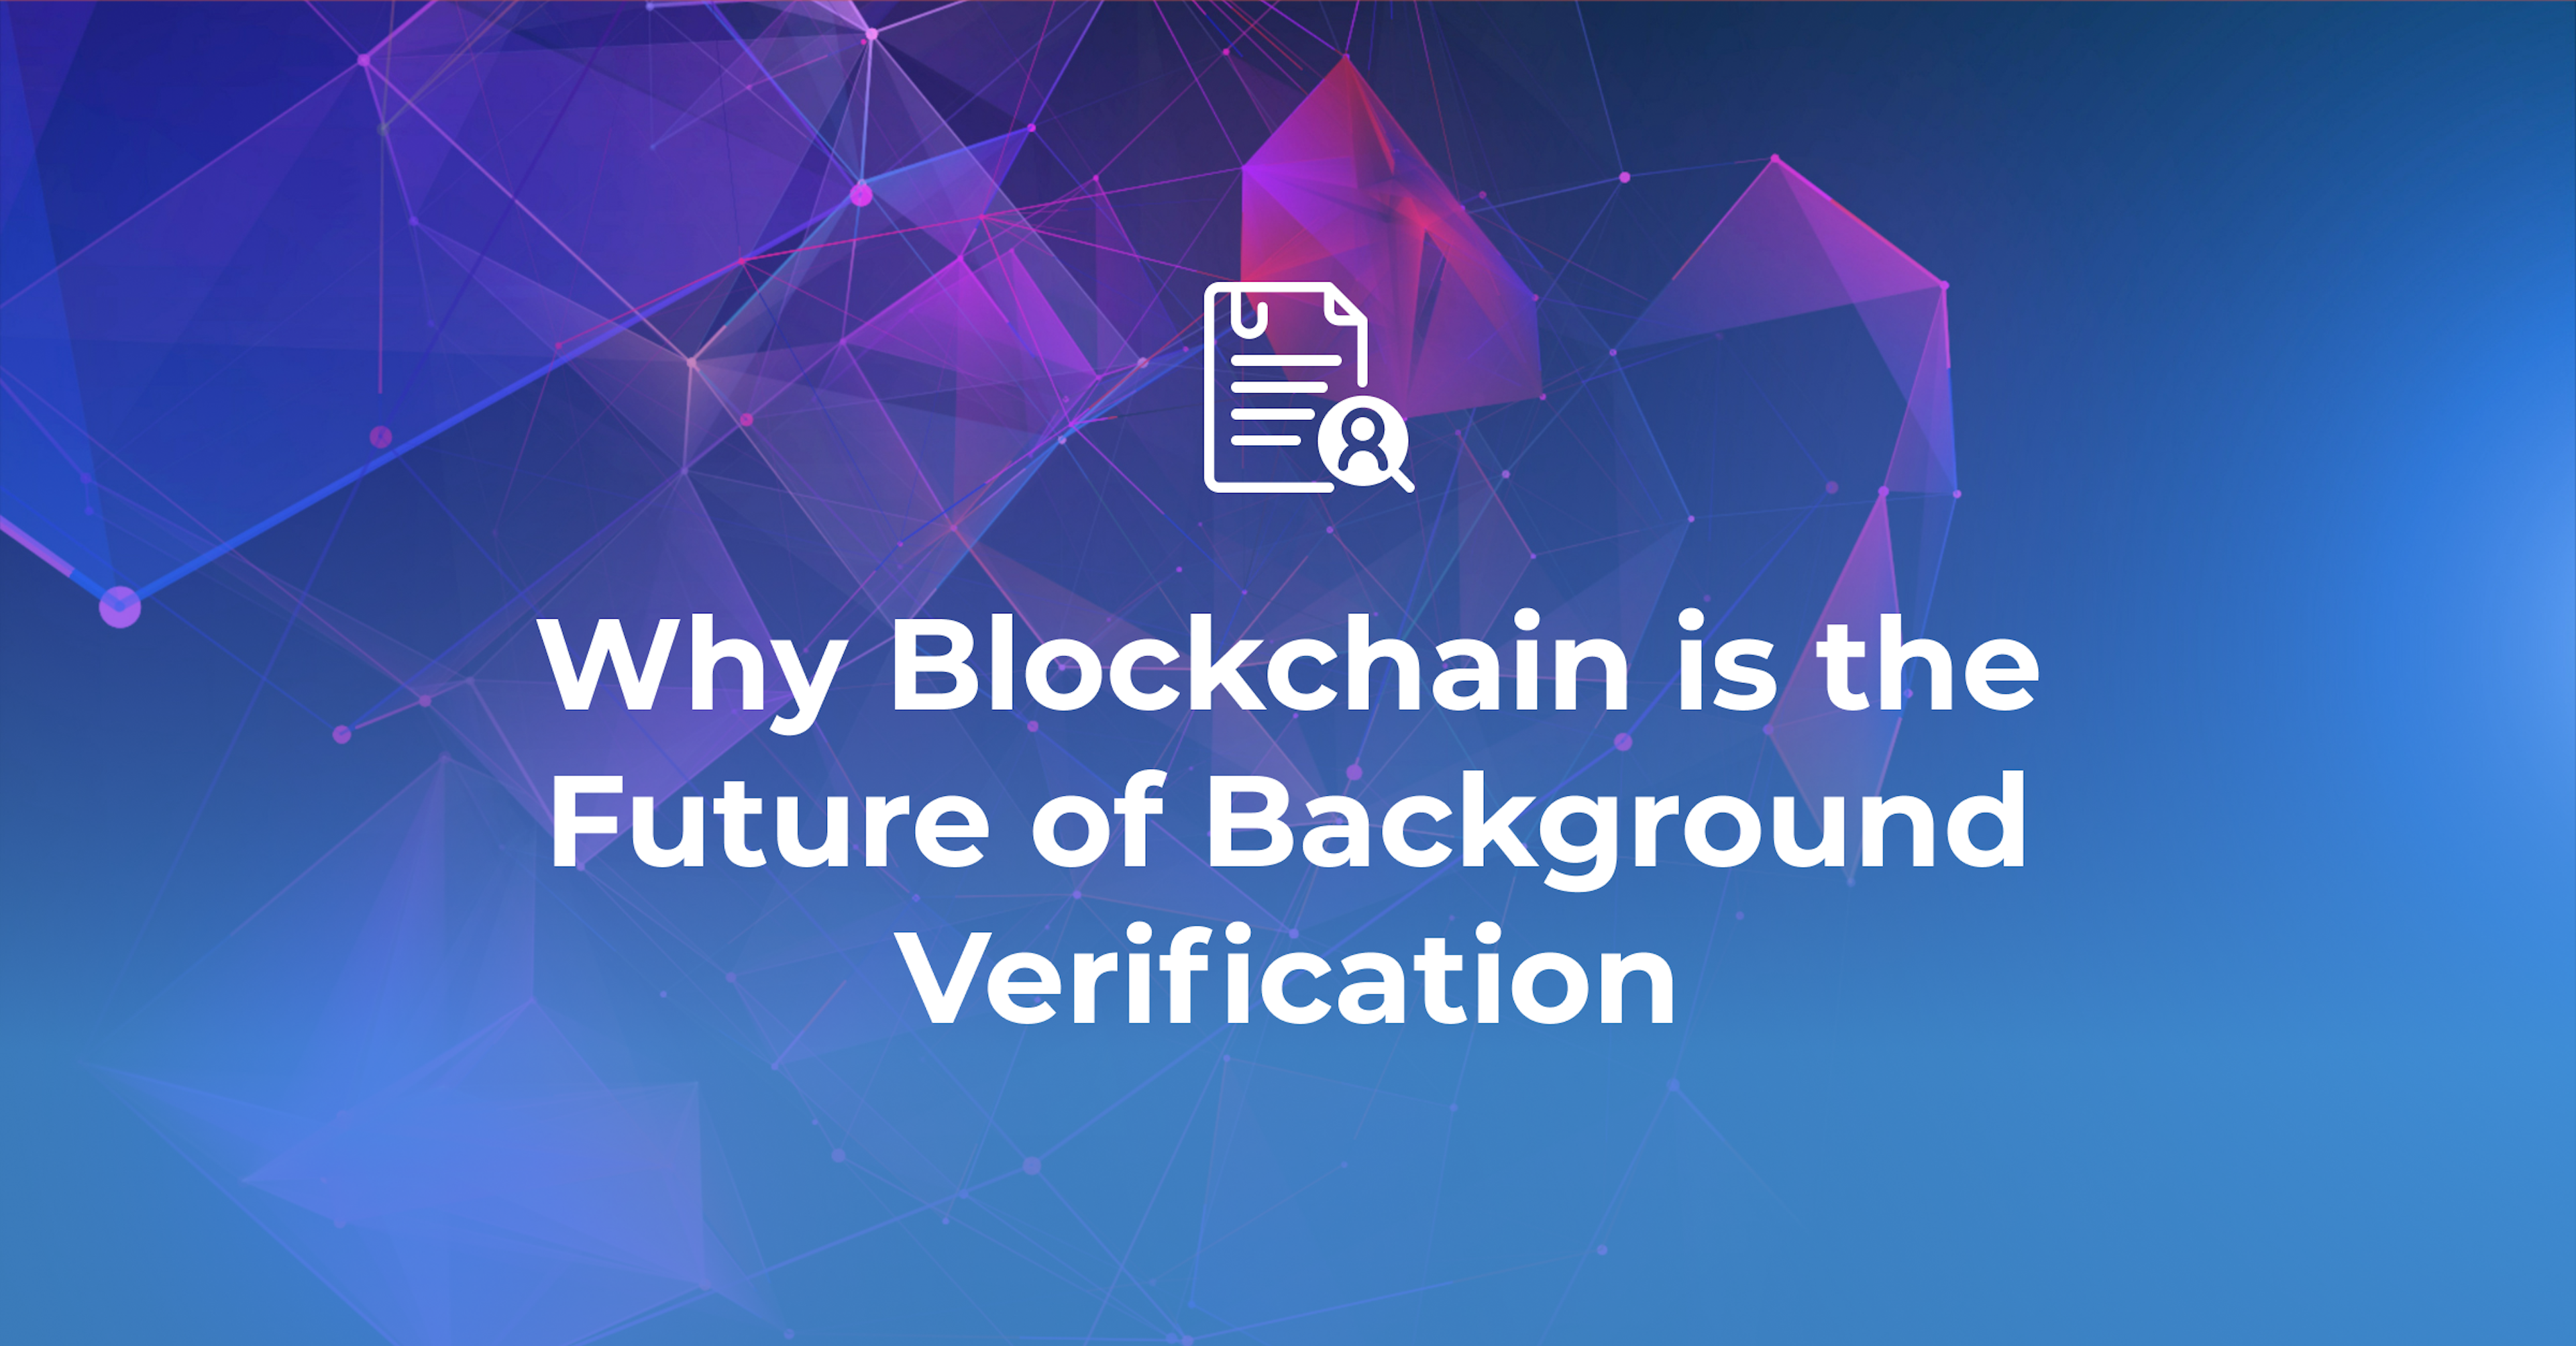 Why Blockchain is the Future of Background Verification